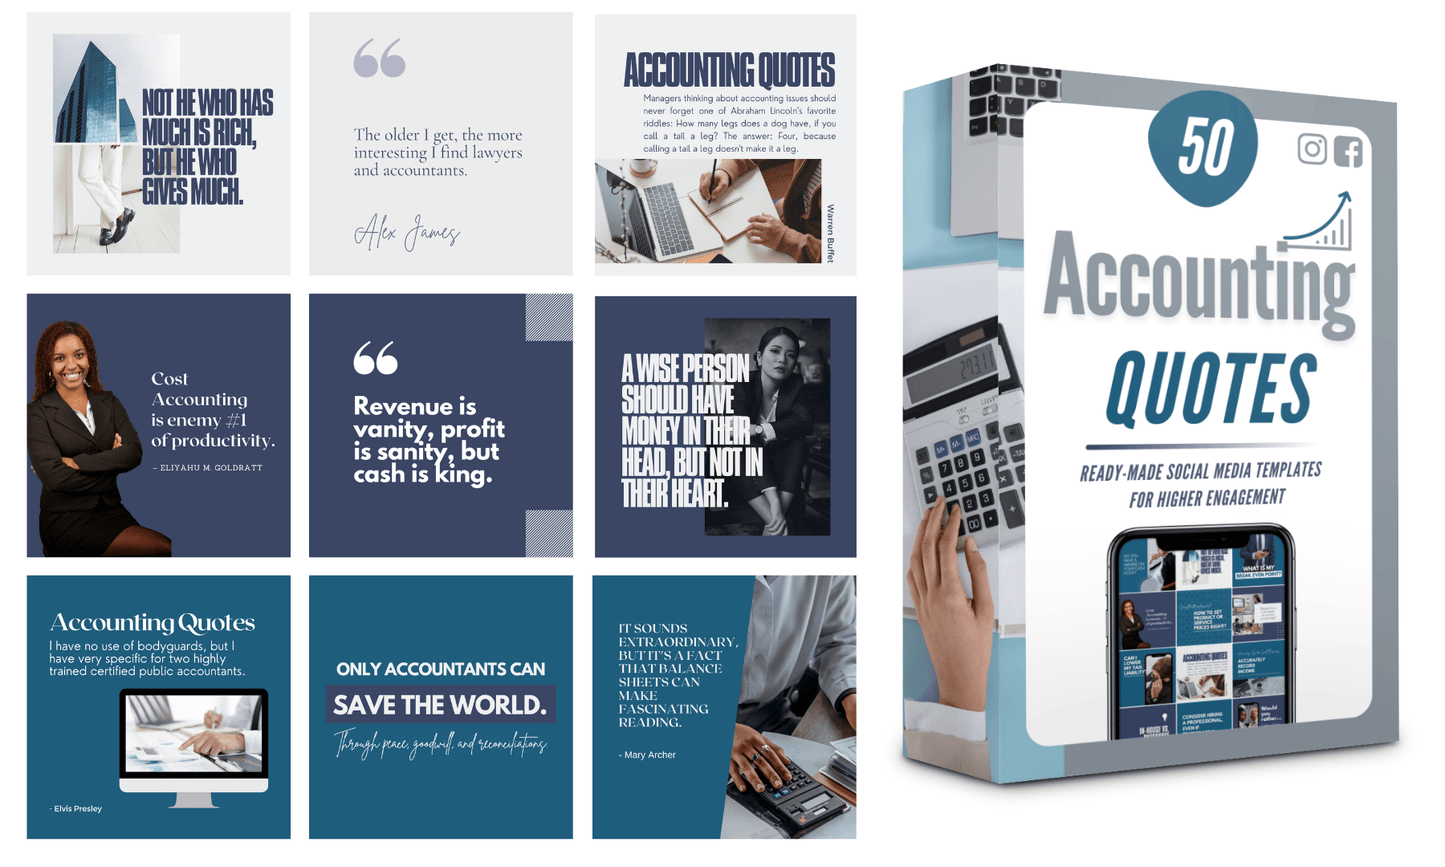 200 Accounting Templates for Social Media